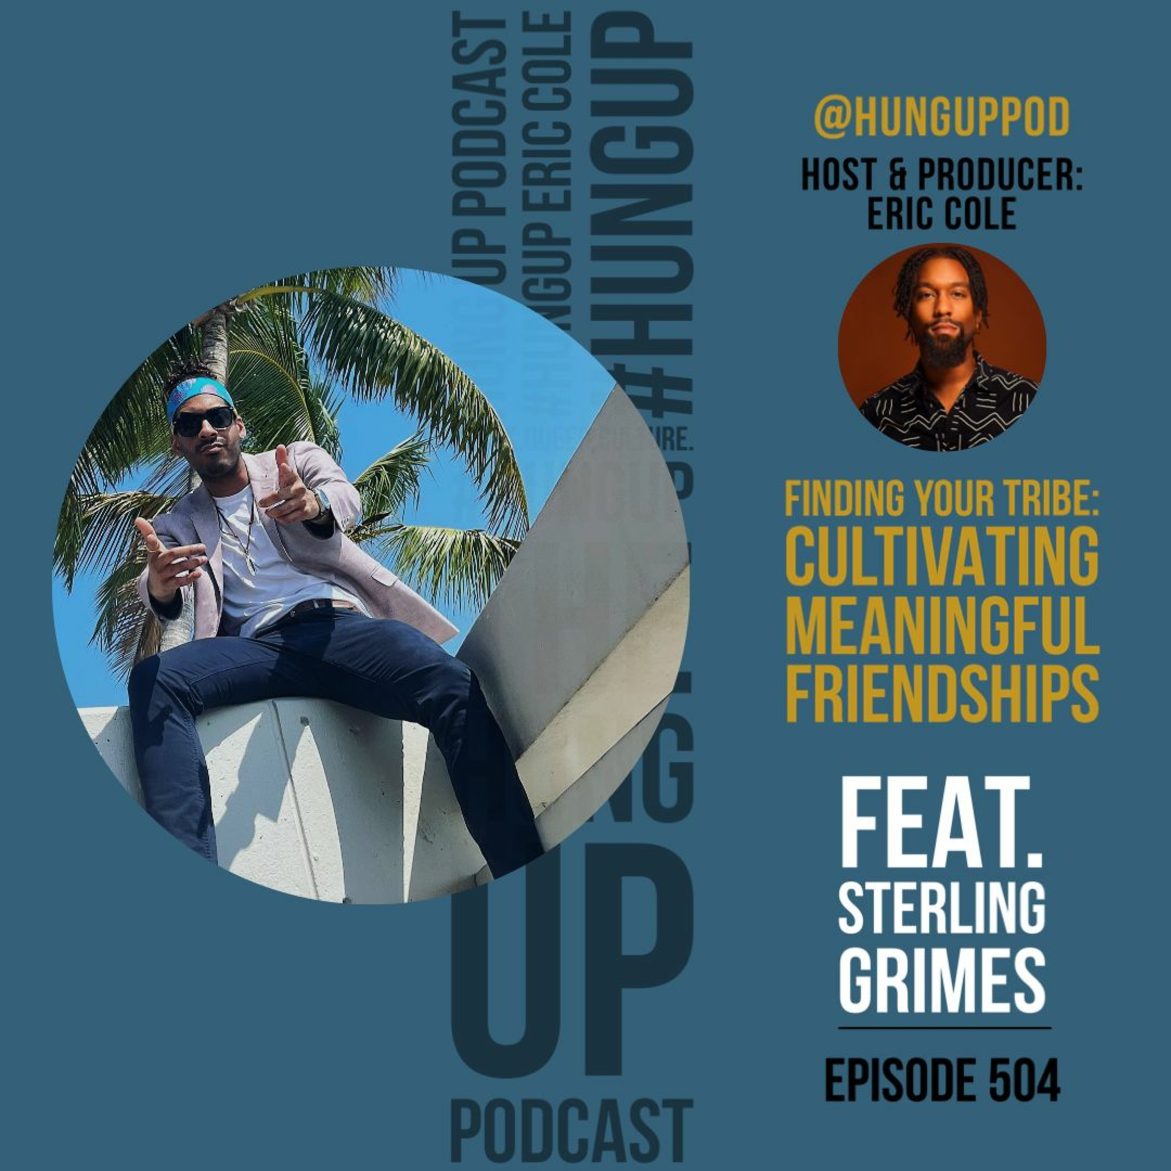 Black Podcasting - Episode 504: Finding Your Tribe: Cultivating Meaningful Friendships Feat. Sterling Grimes